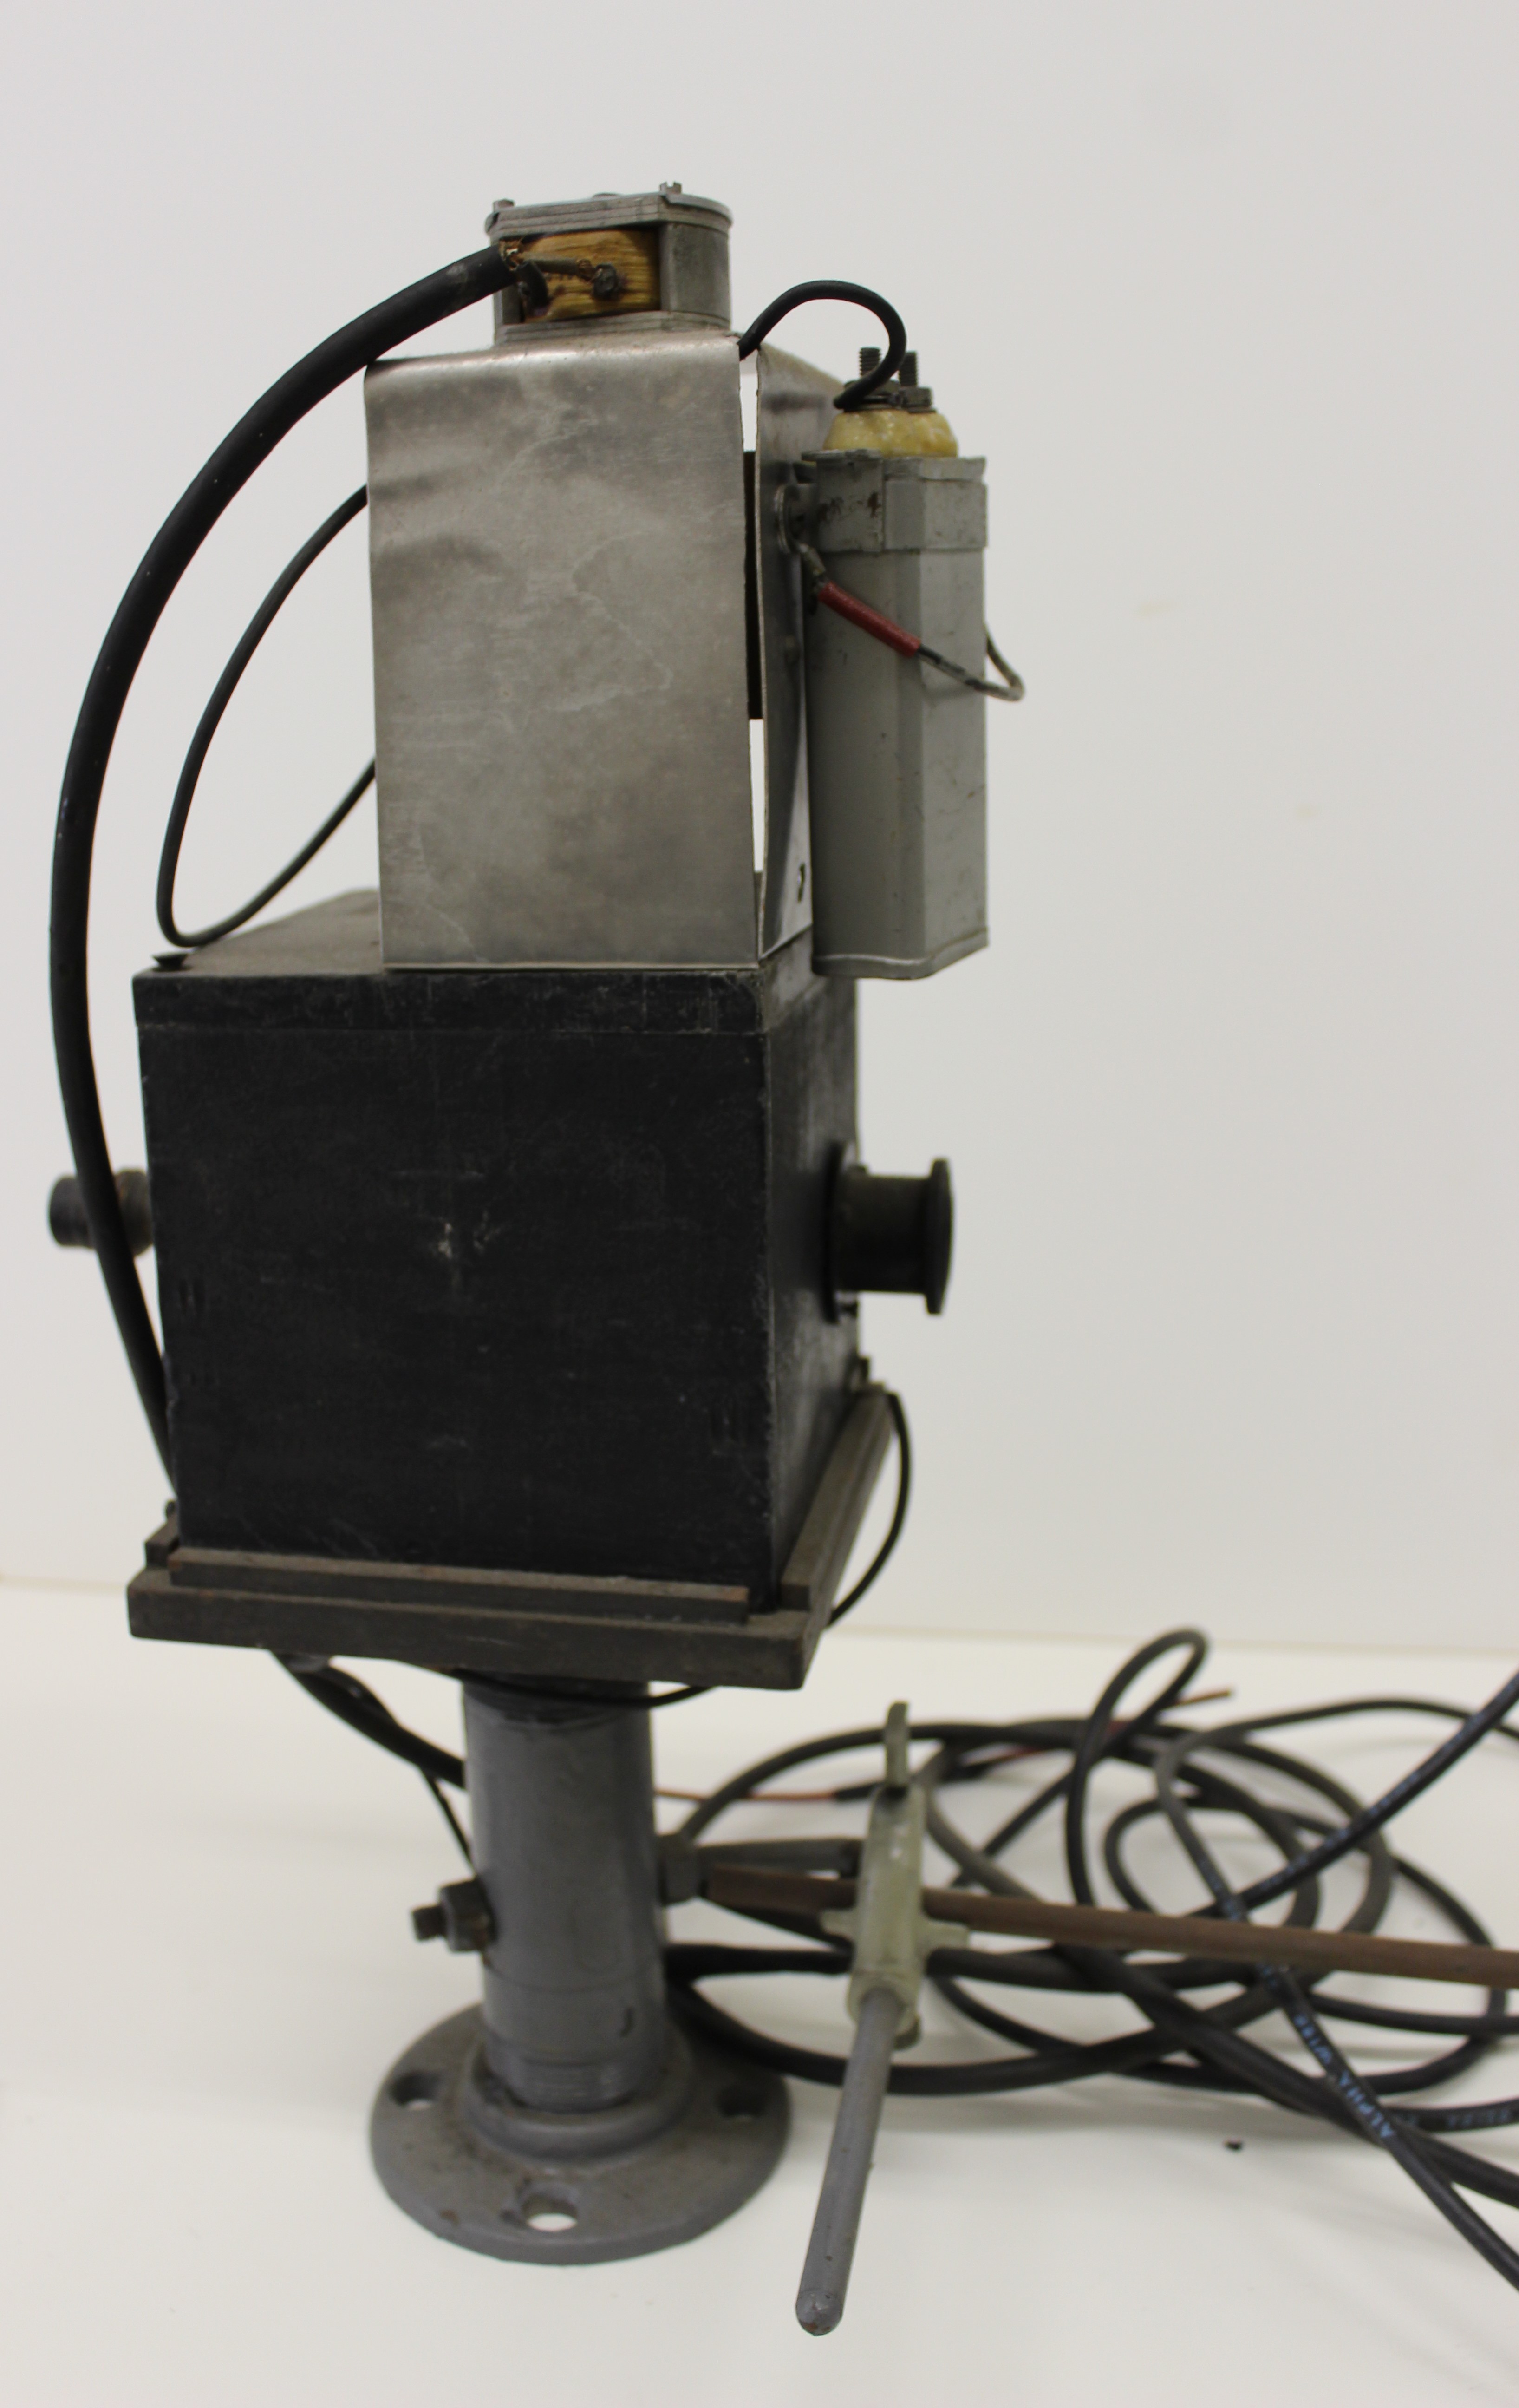 Electroscope that Constance Torrey would have used from 1928 -1949.